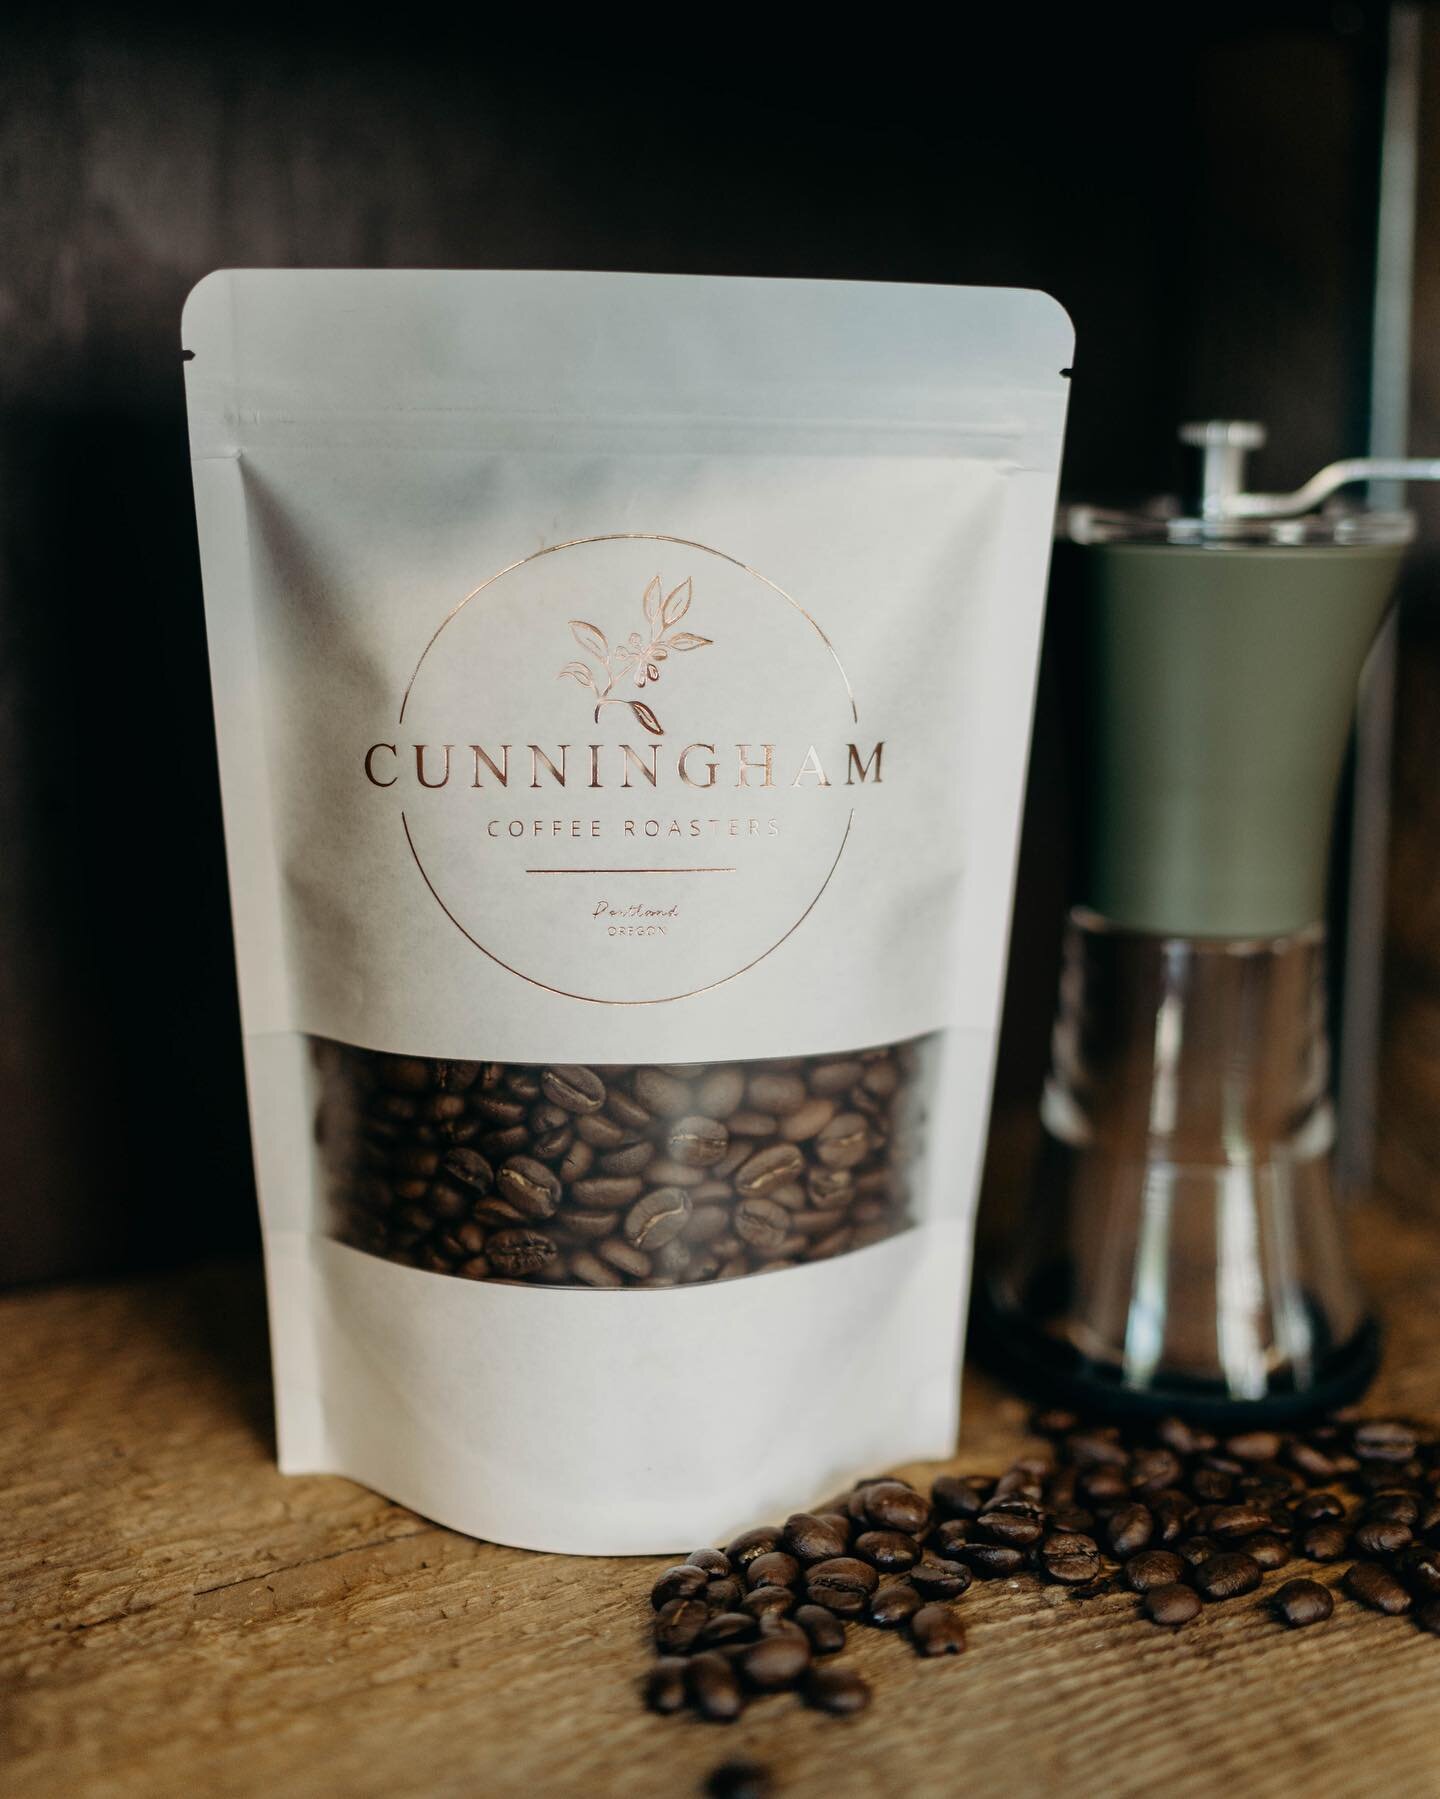 We can&rsquo;t believe it! Since launching our online store you&rsquo;ve ordered nearly 1000 times! 😲

As we approach our 1000th online order want to celebrate! 🎉

If you place order number 1000 www.cunninghamcoffeeroasters.com we are giving you $1